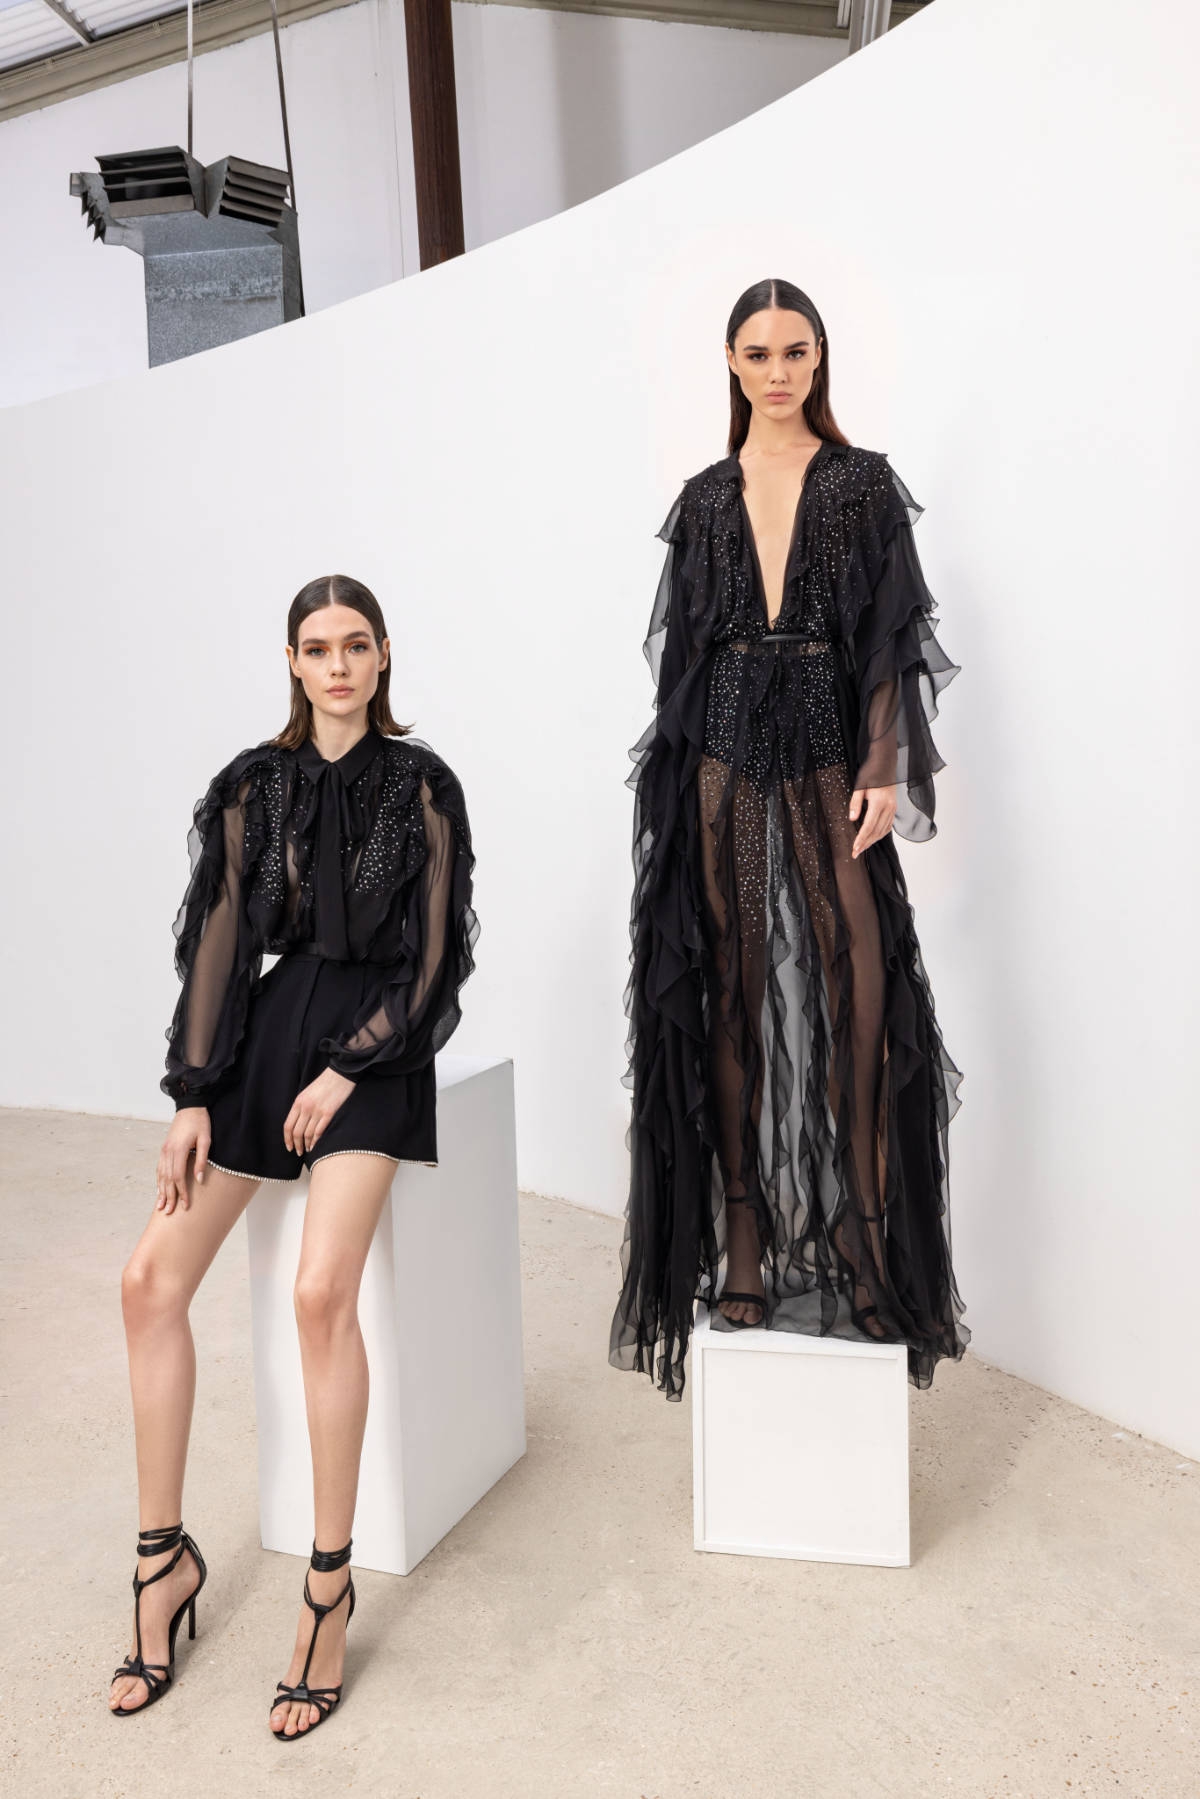 Zuhair Murad Presents Its New Spring-Summer 2023 Ready-To-Wear Collection: Ripple Of Matter